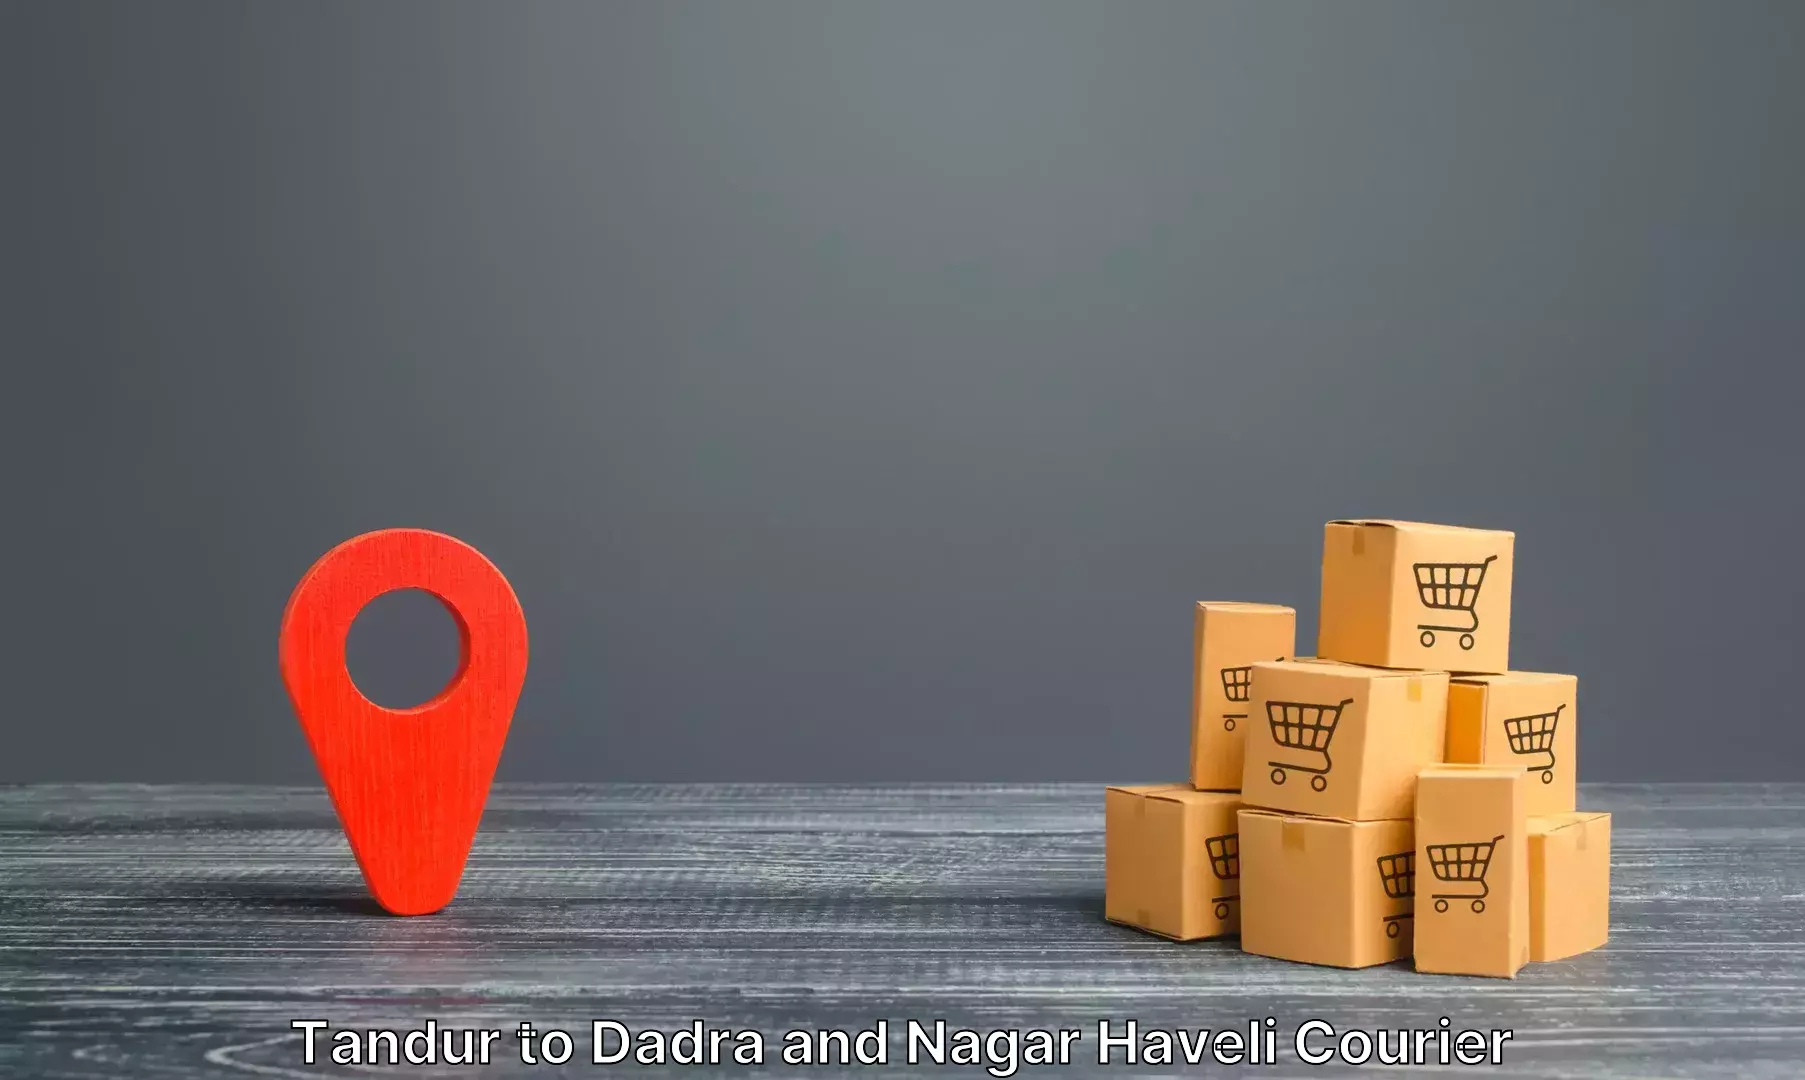 Luggage delivery system Tandur to Dadra and Nagar Haveli